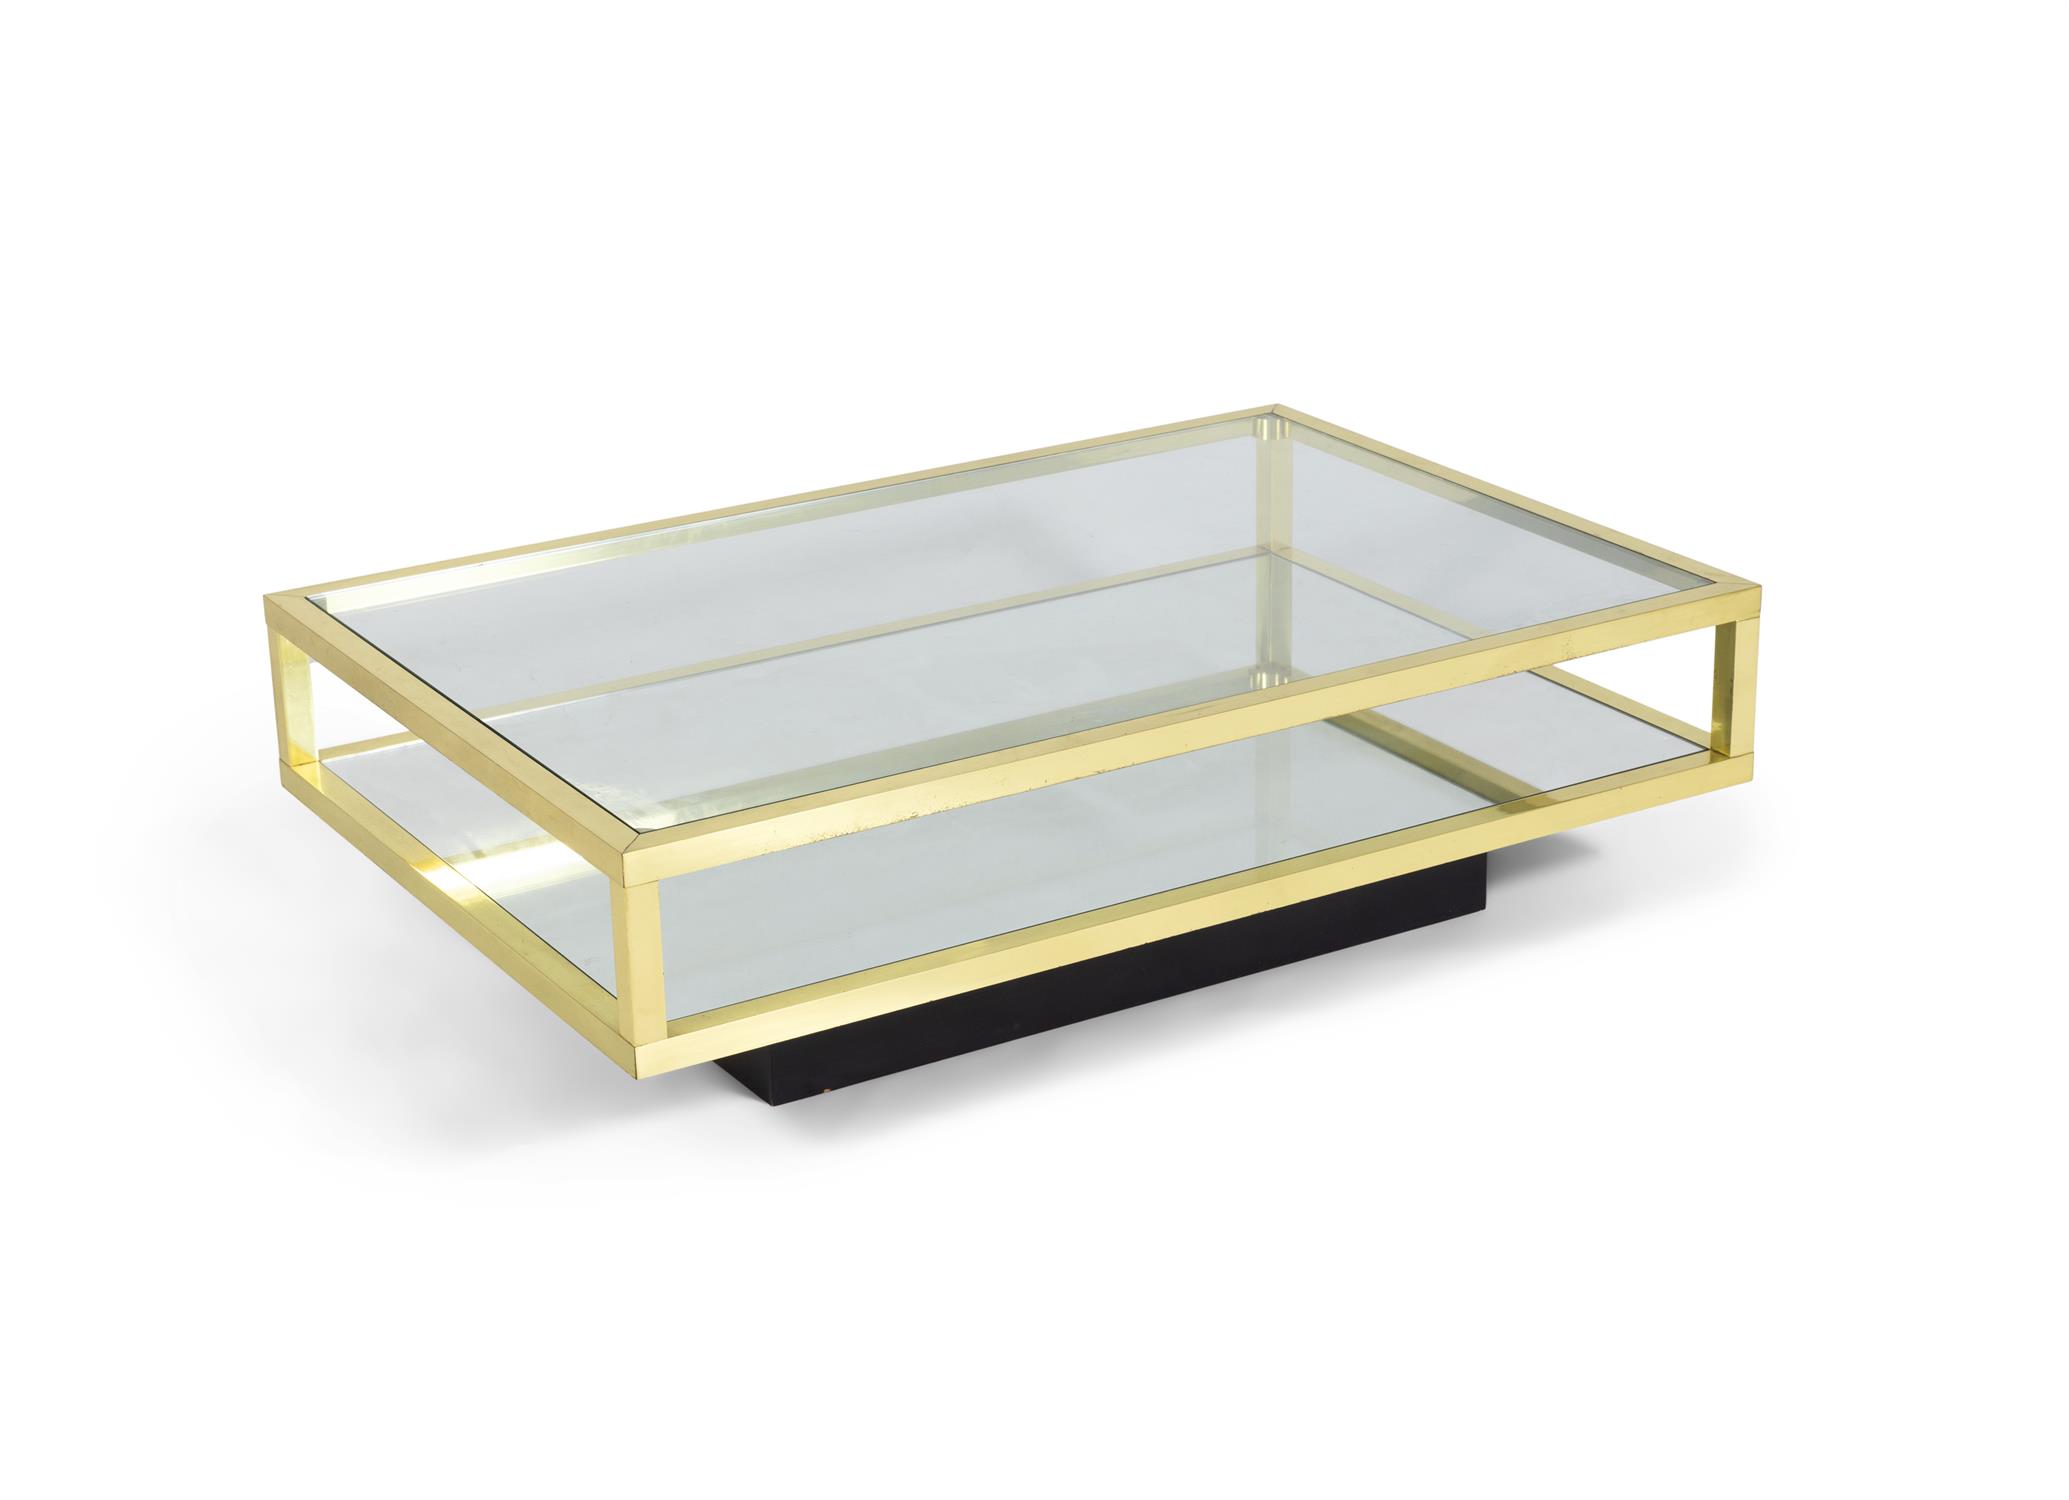 COFFEE TABLE A brass two tier coffee table with glass and mirror tops. Italy, c.1970. - Image 2 of 4